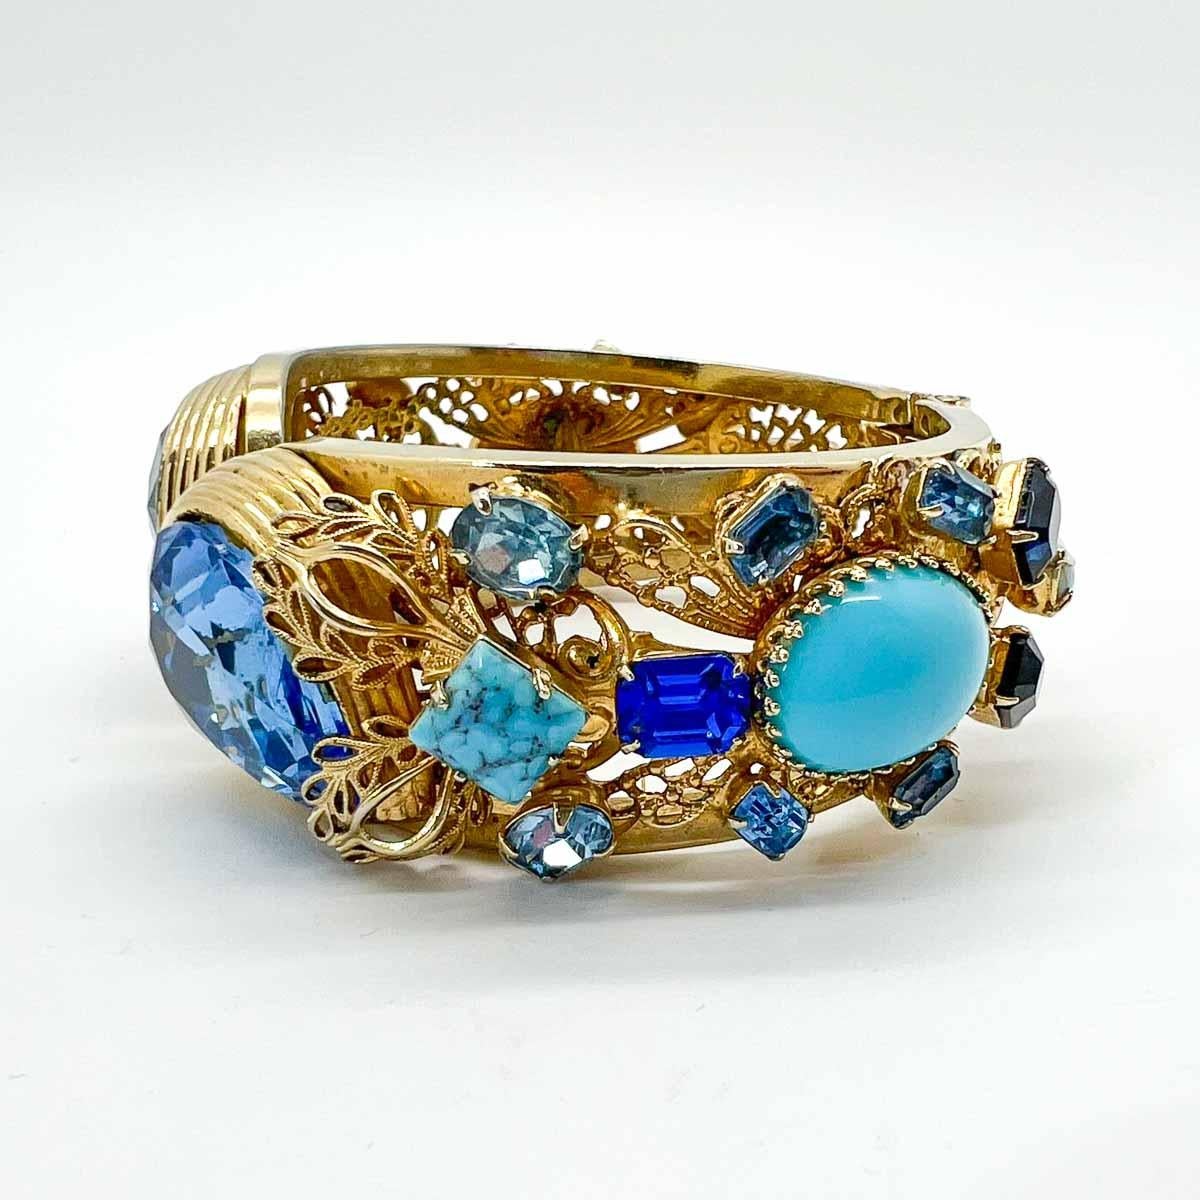 A beautiful statement vintage blue teardrop clamper bracelet. Featuring a myriad of fancy cut stones including opulent cabochons, in blue hues and turquoise shades set amongst a filigree backdrop. The large teardrop crystals a particularly wonderful